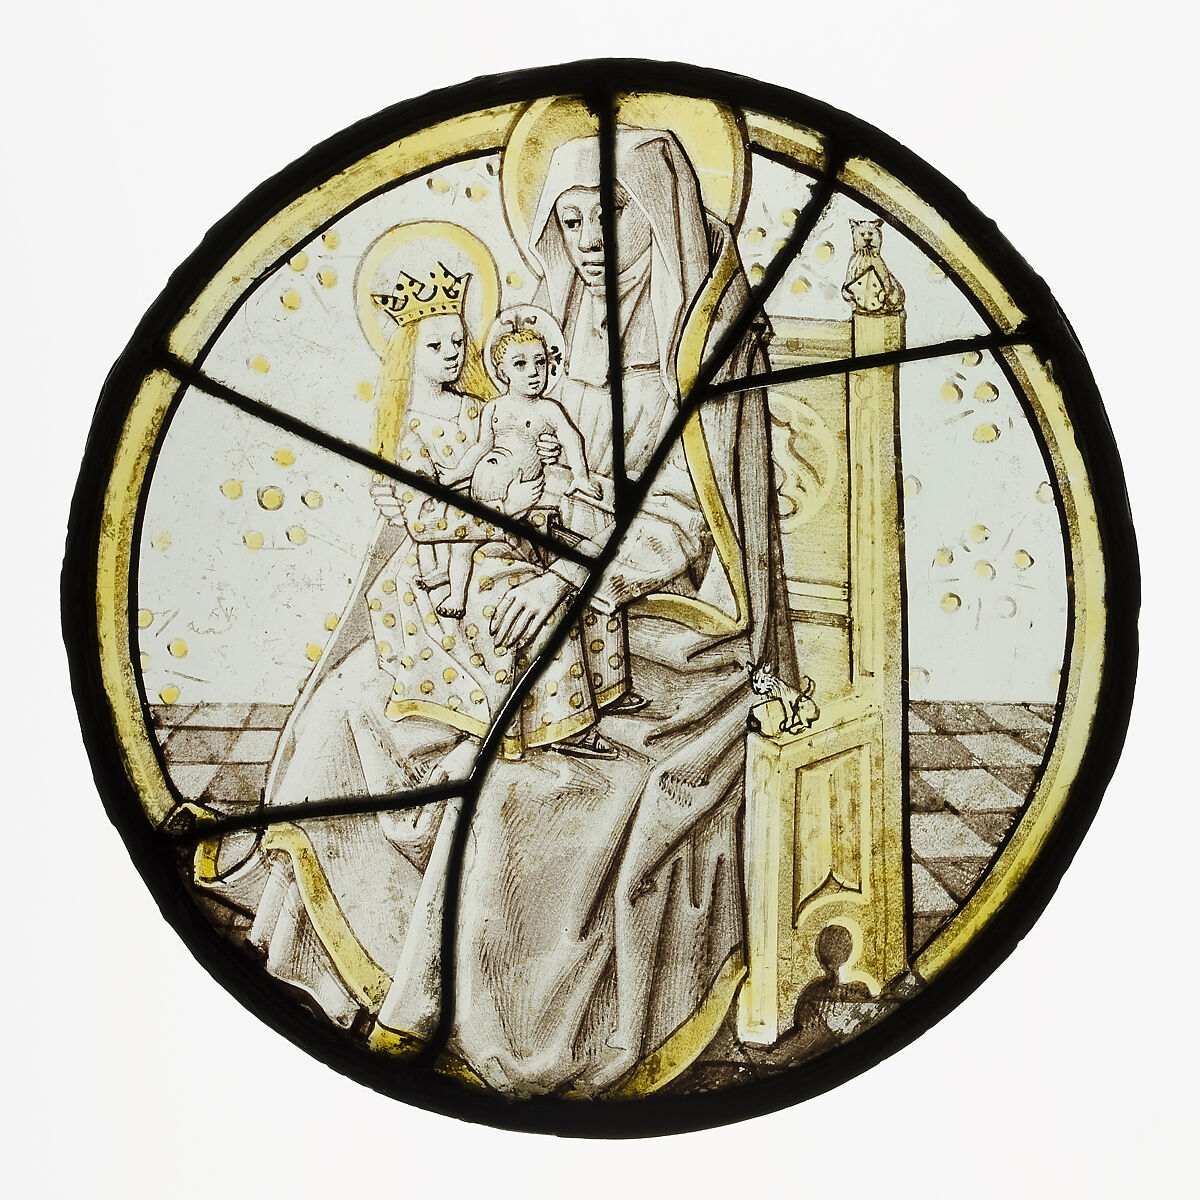 Roundel with Saint Anne with the Virgin and Child, Colorless glass, silver stain, vitreous paint, South Netherlandish 